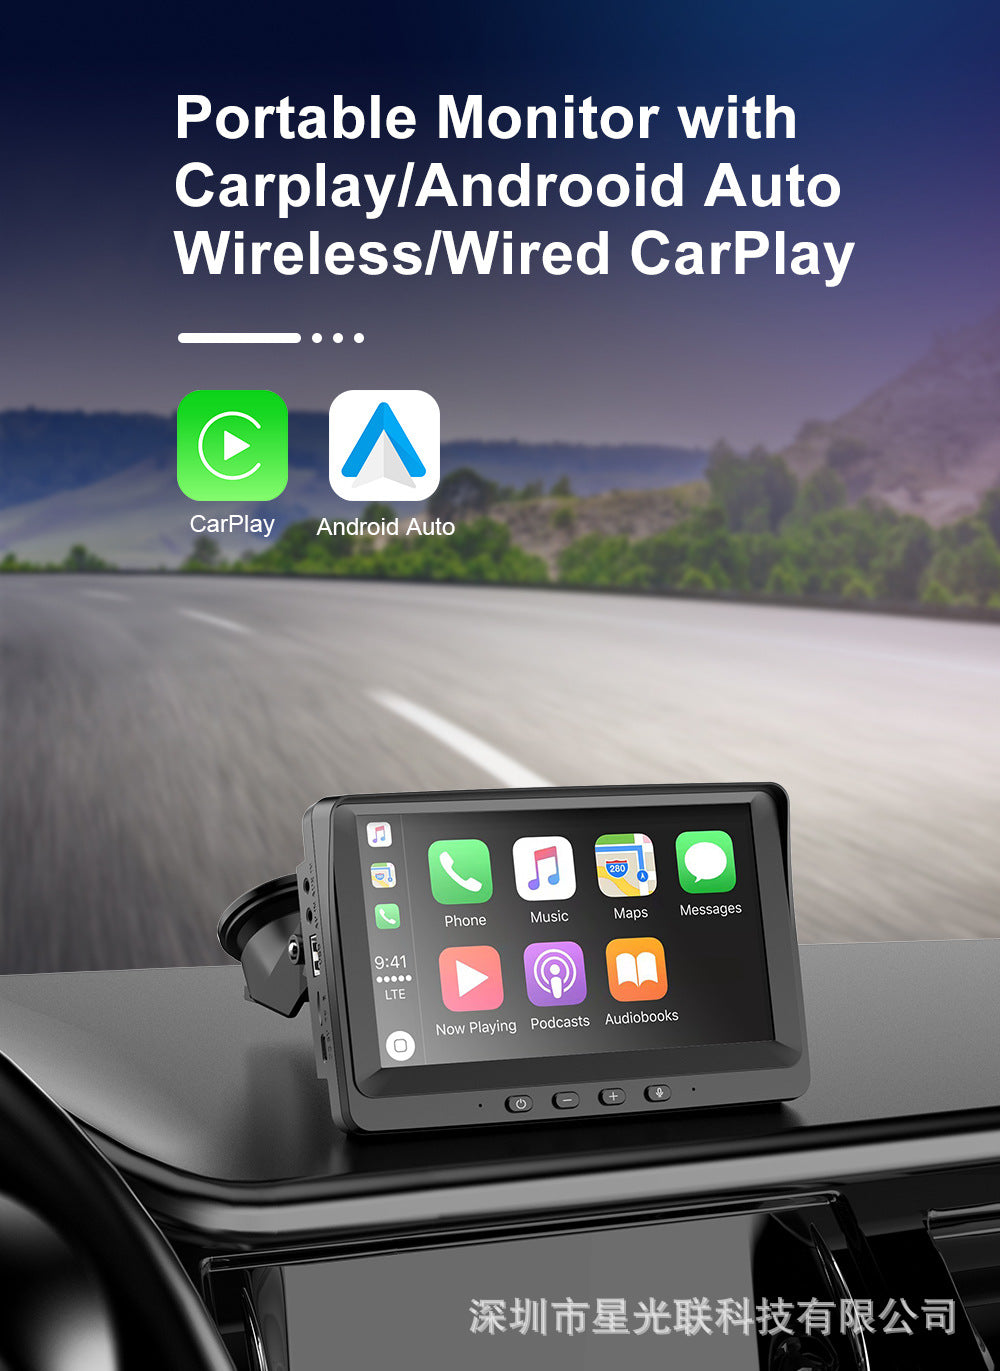 Screen for car with Carplay and Android Auto wireless